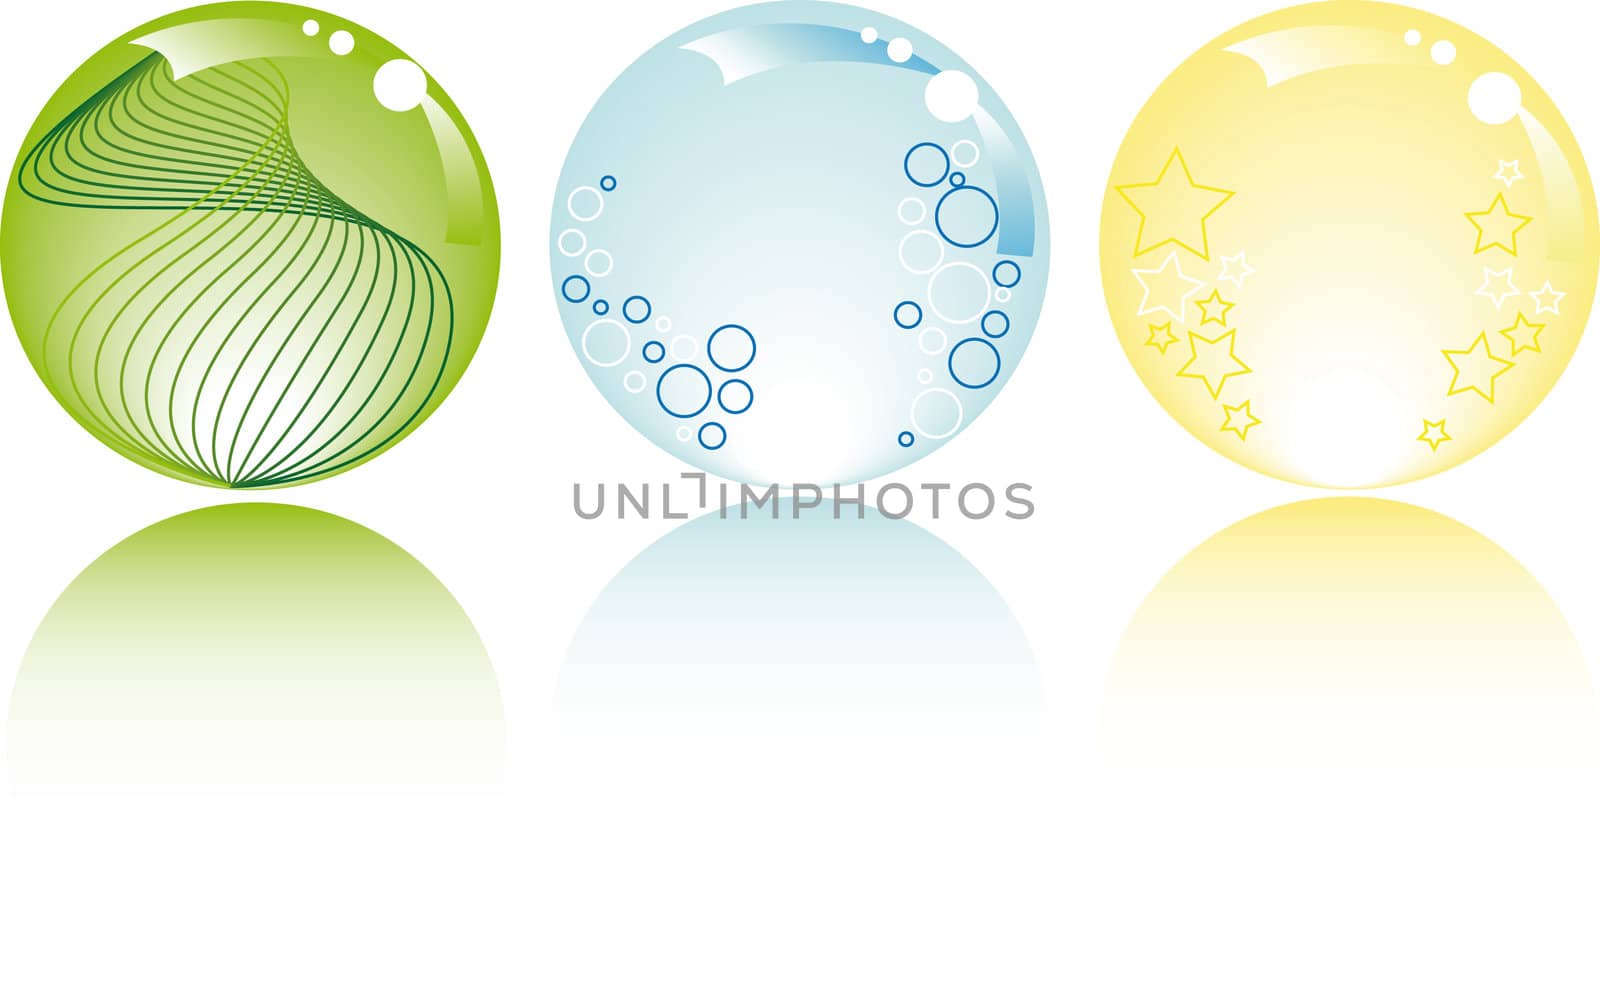 glowing spheres with white background by karinclaus